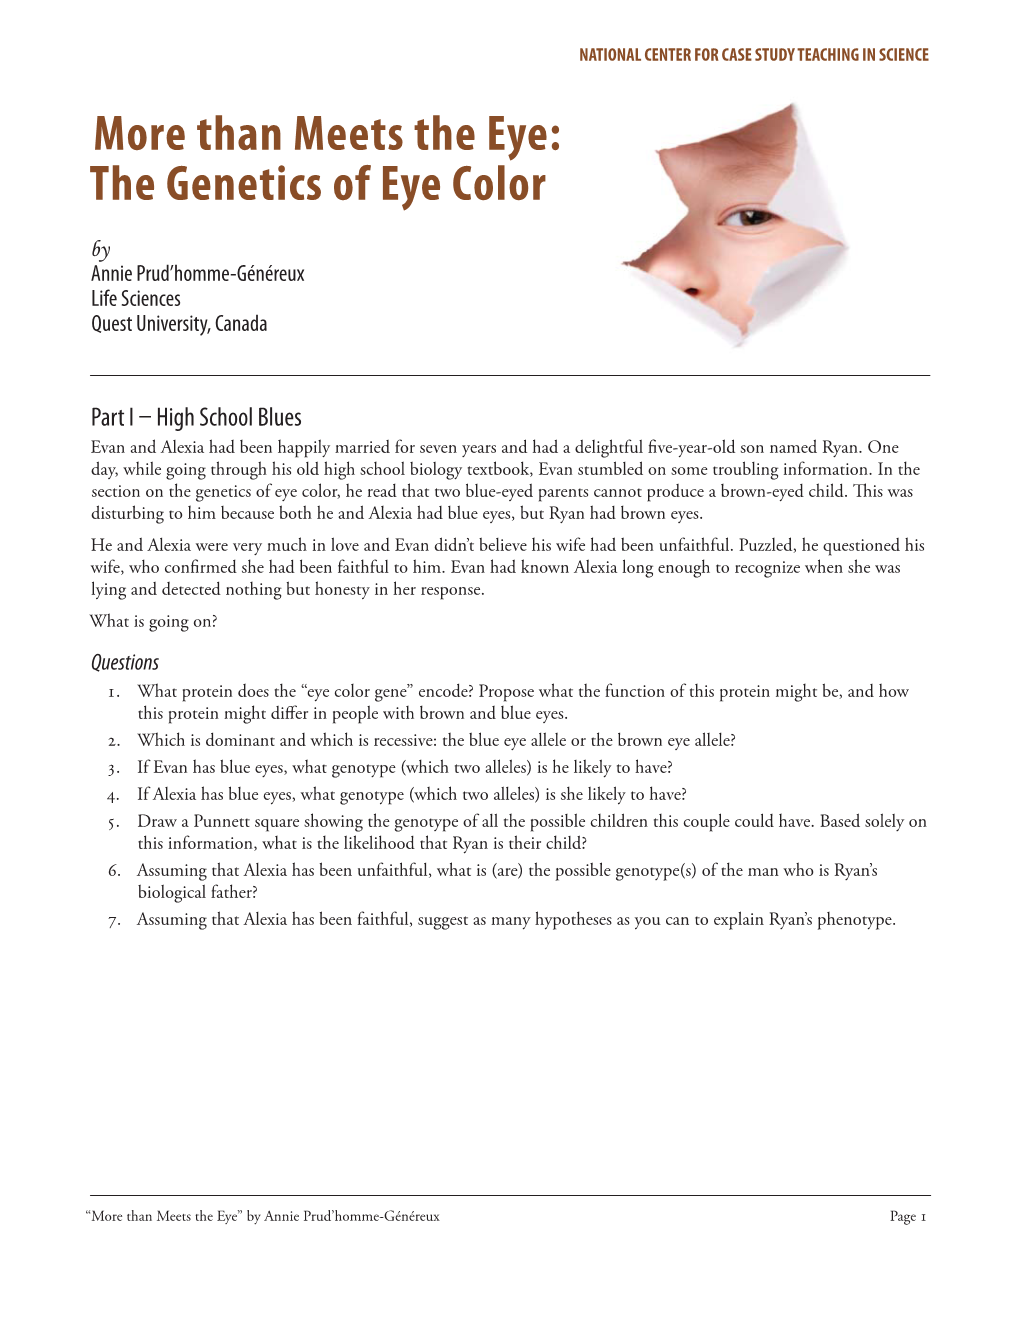 More Than Meets the Eye: the Genetics of Eye Color by Annie Prud’Homme-Généreux Life Sciences Quest University, Canada